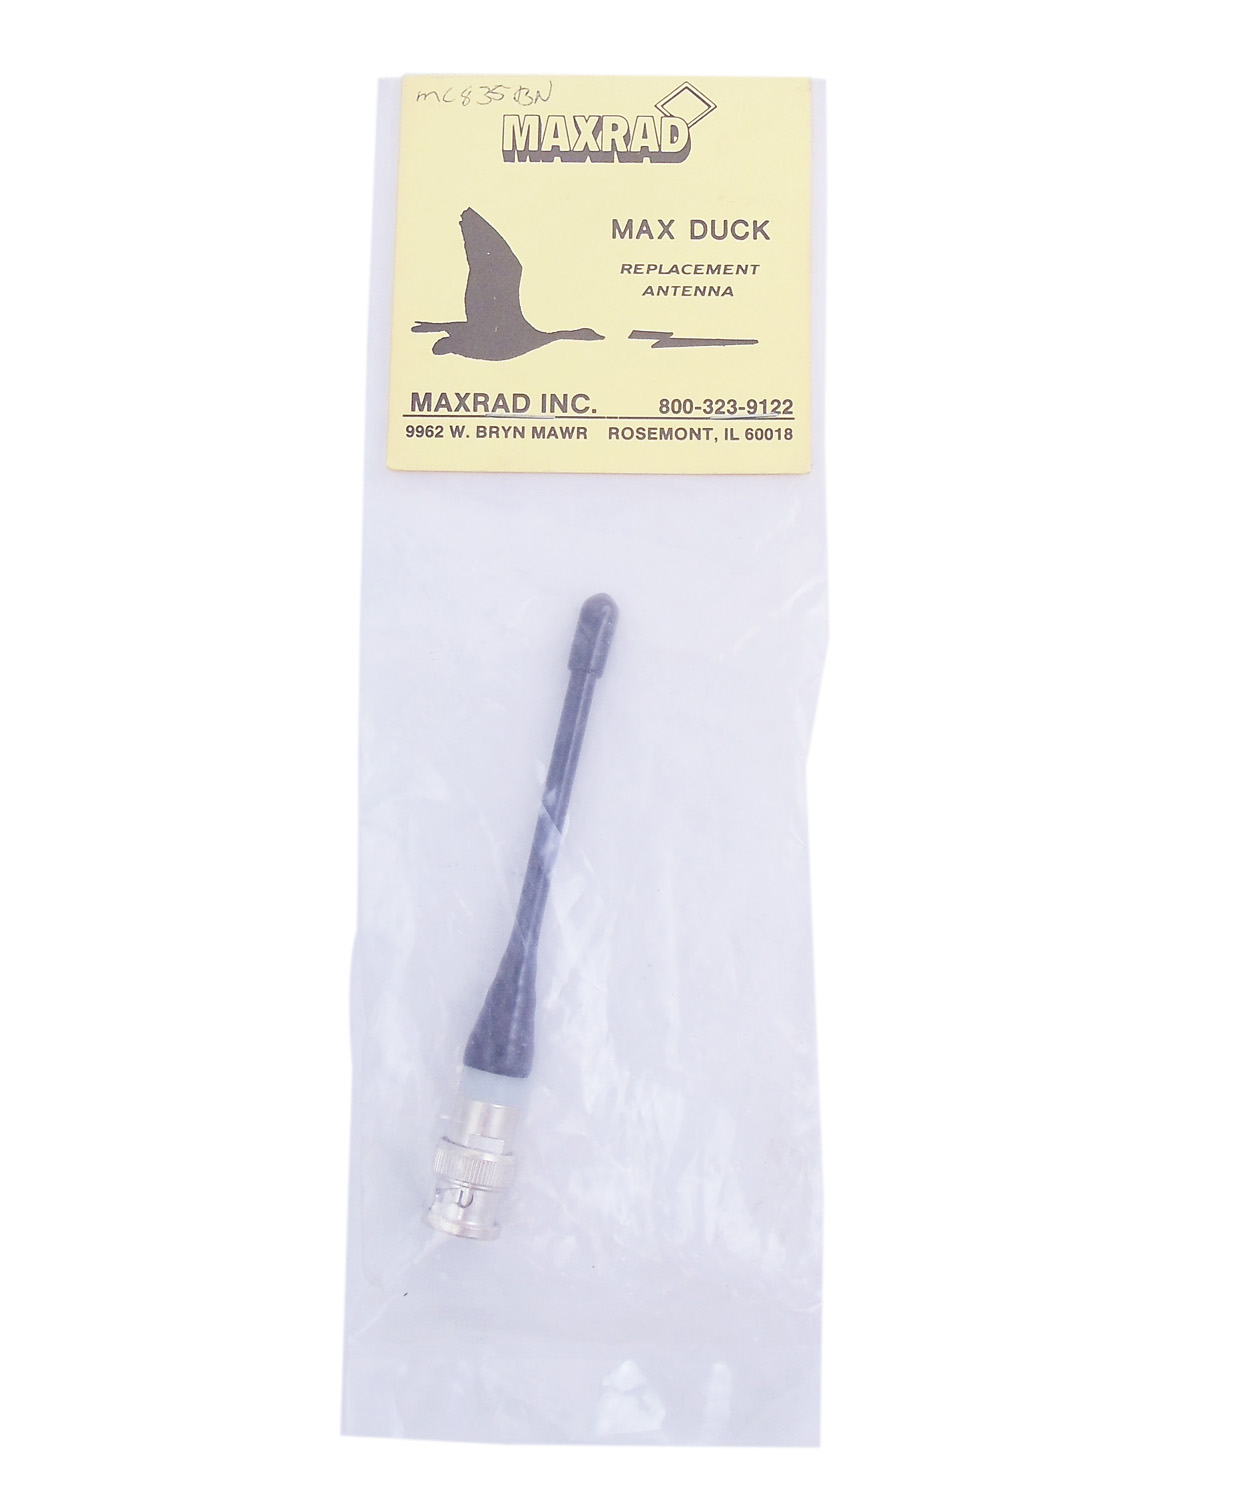 Maxrad - 4" Tall 835 Mhz Rubber Antenna With Bnc Fitting